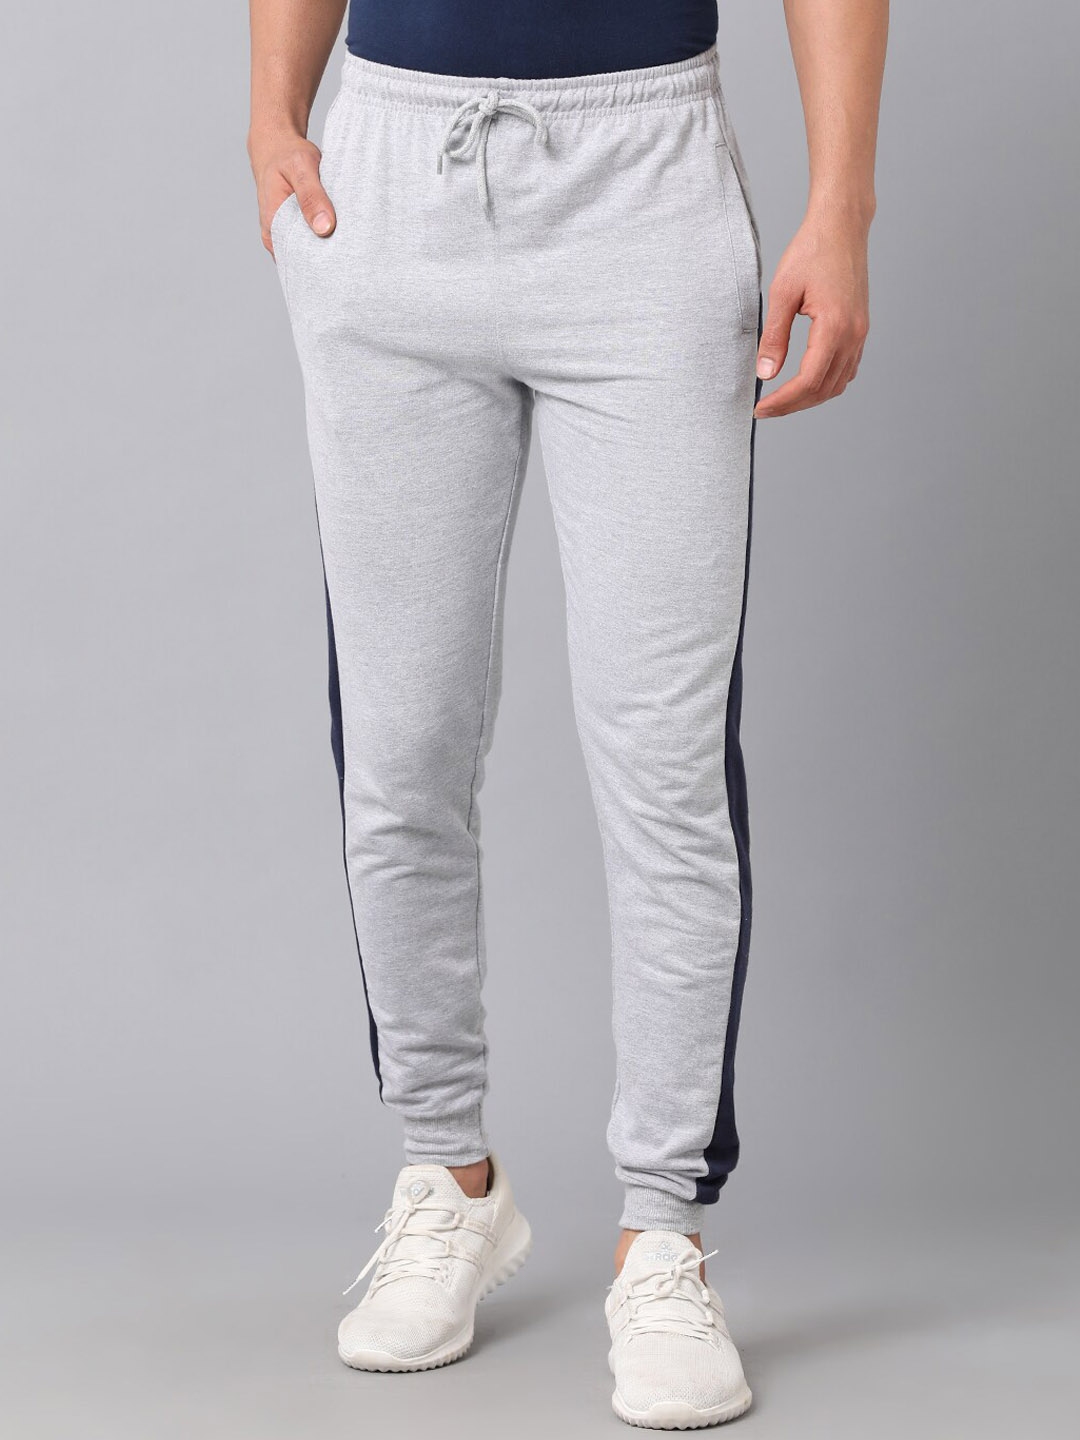 Buy MADSTO Men Grey Solid Cotton Joggers - Track Pants for Men 19521182 ...